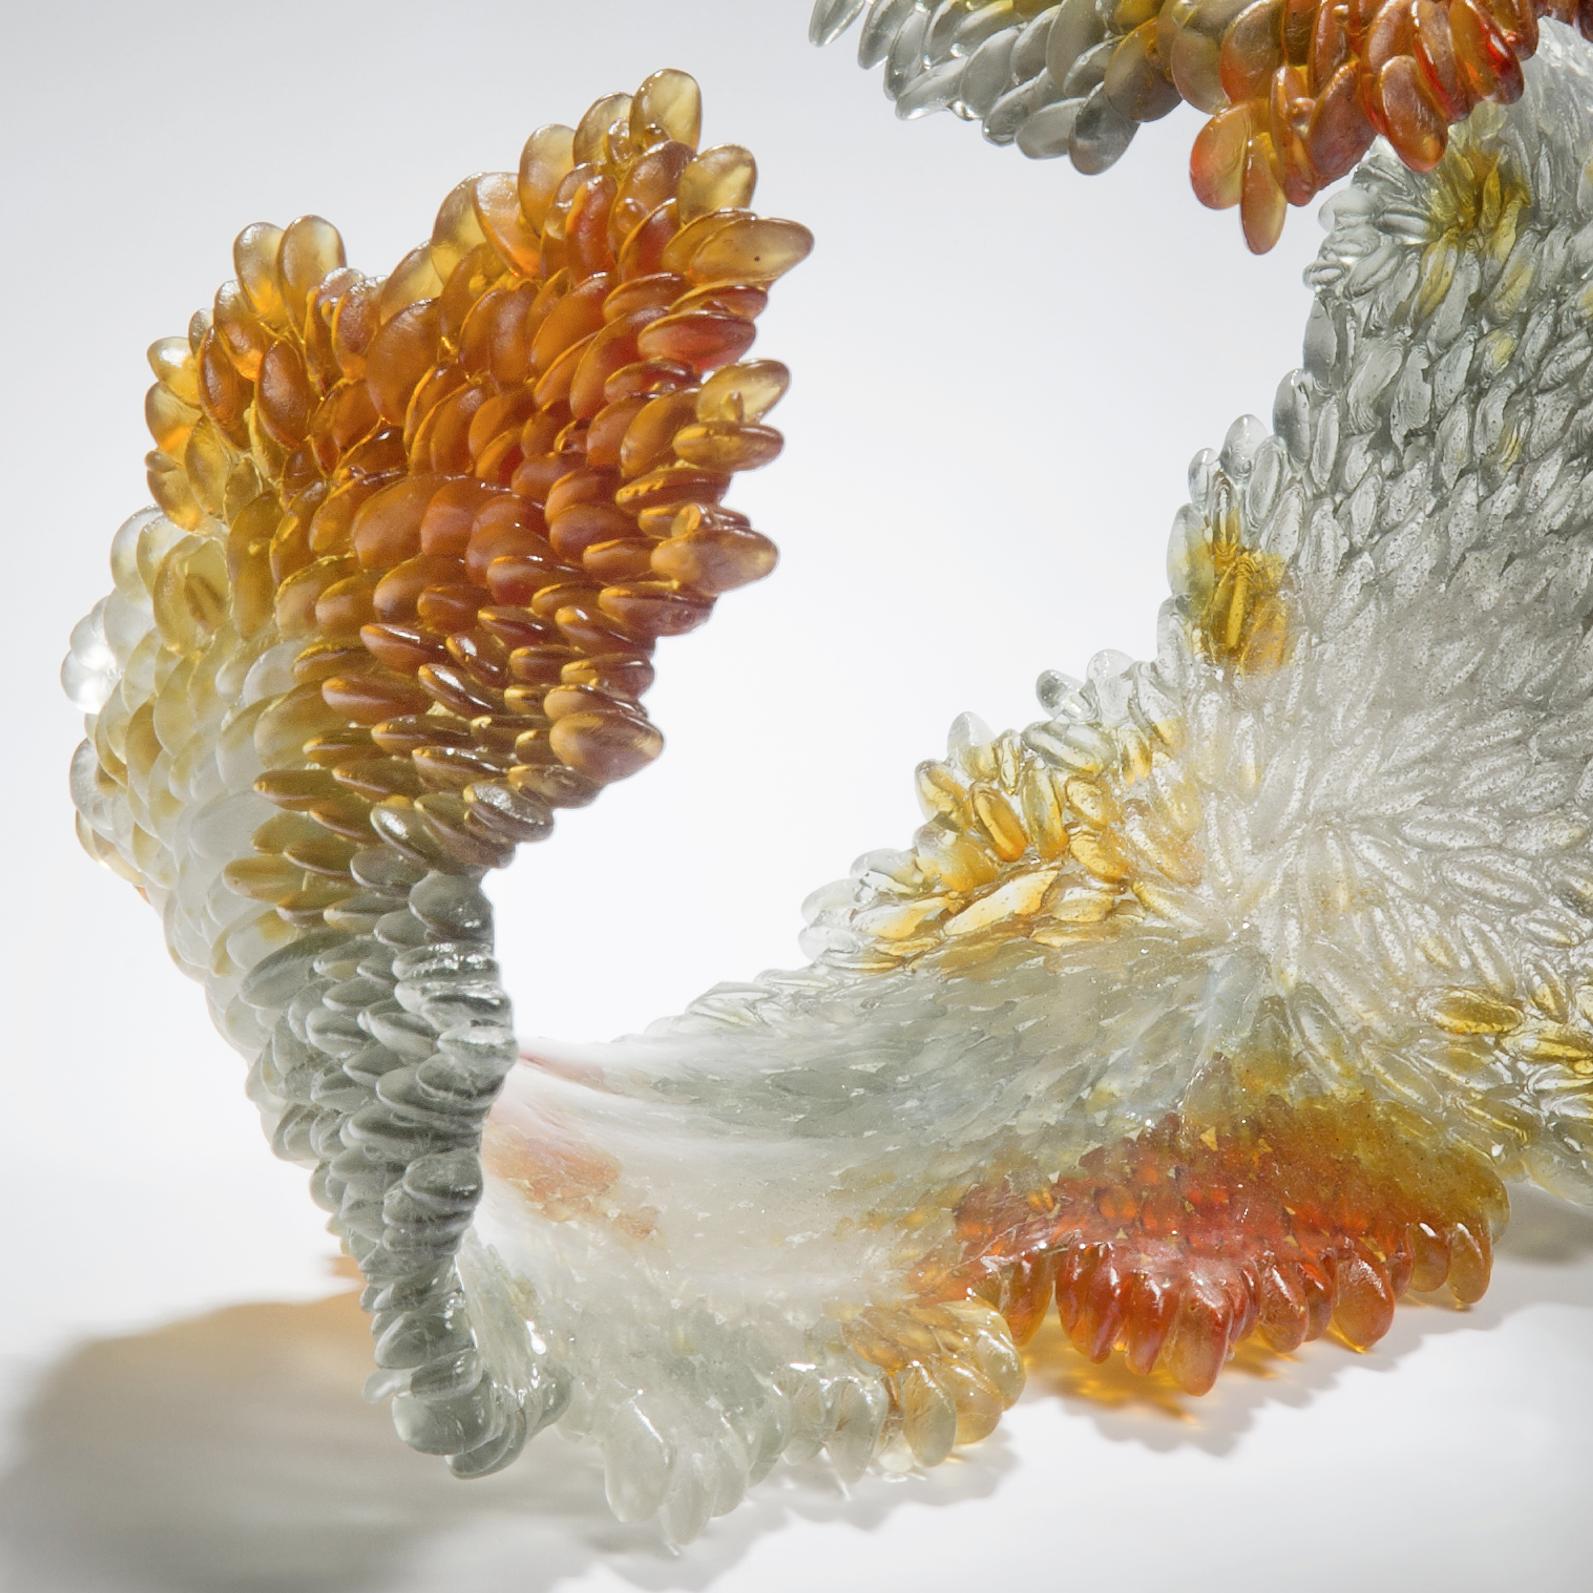 Cast Changing Colors, a Glass Sculpture in Clear & Amber by Nina Casson McGarva